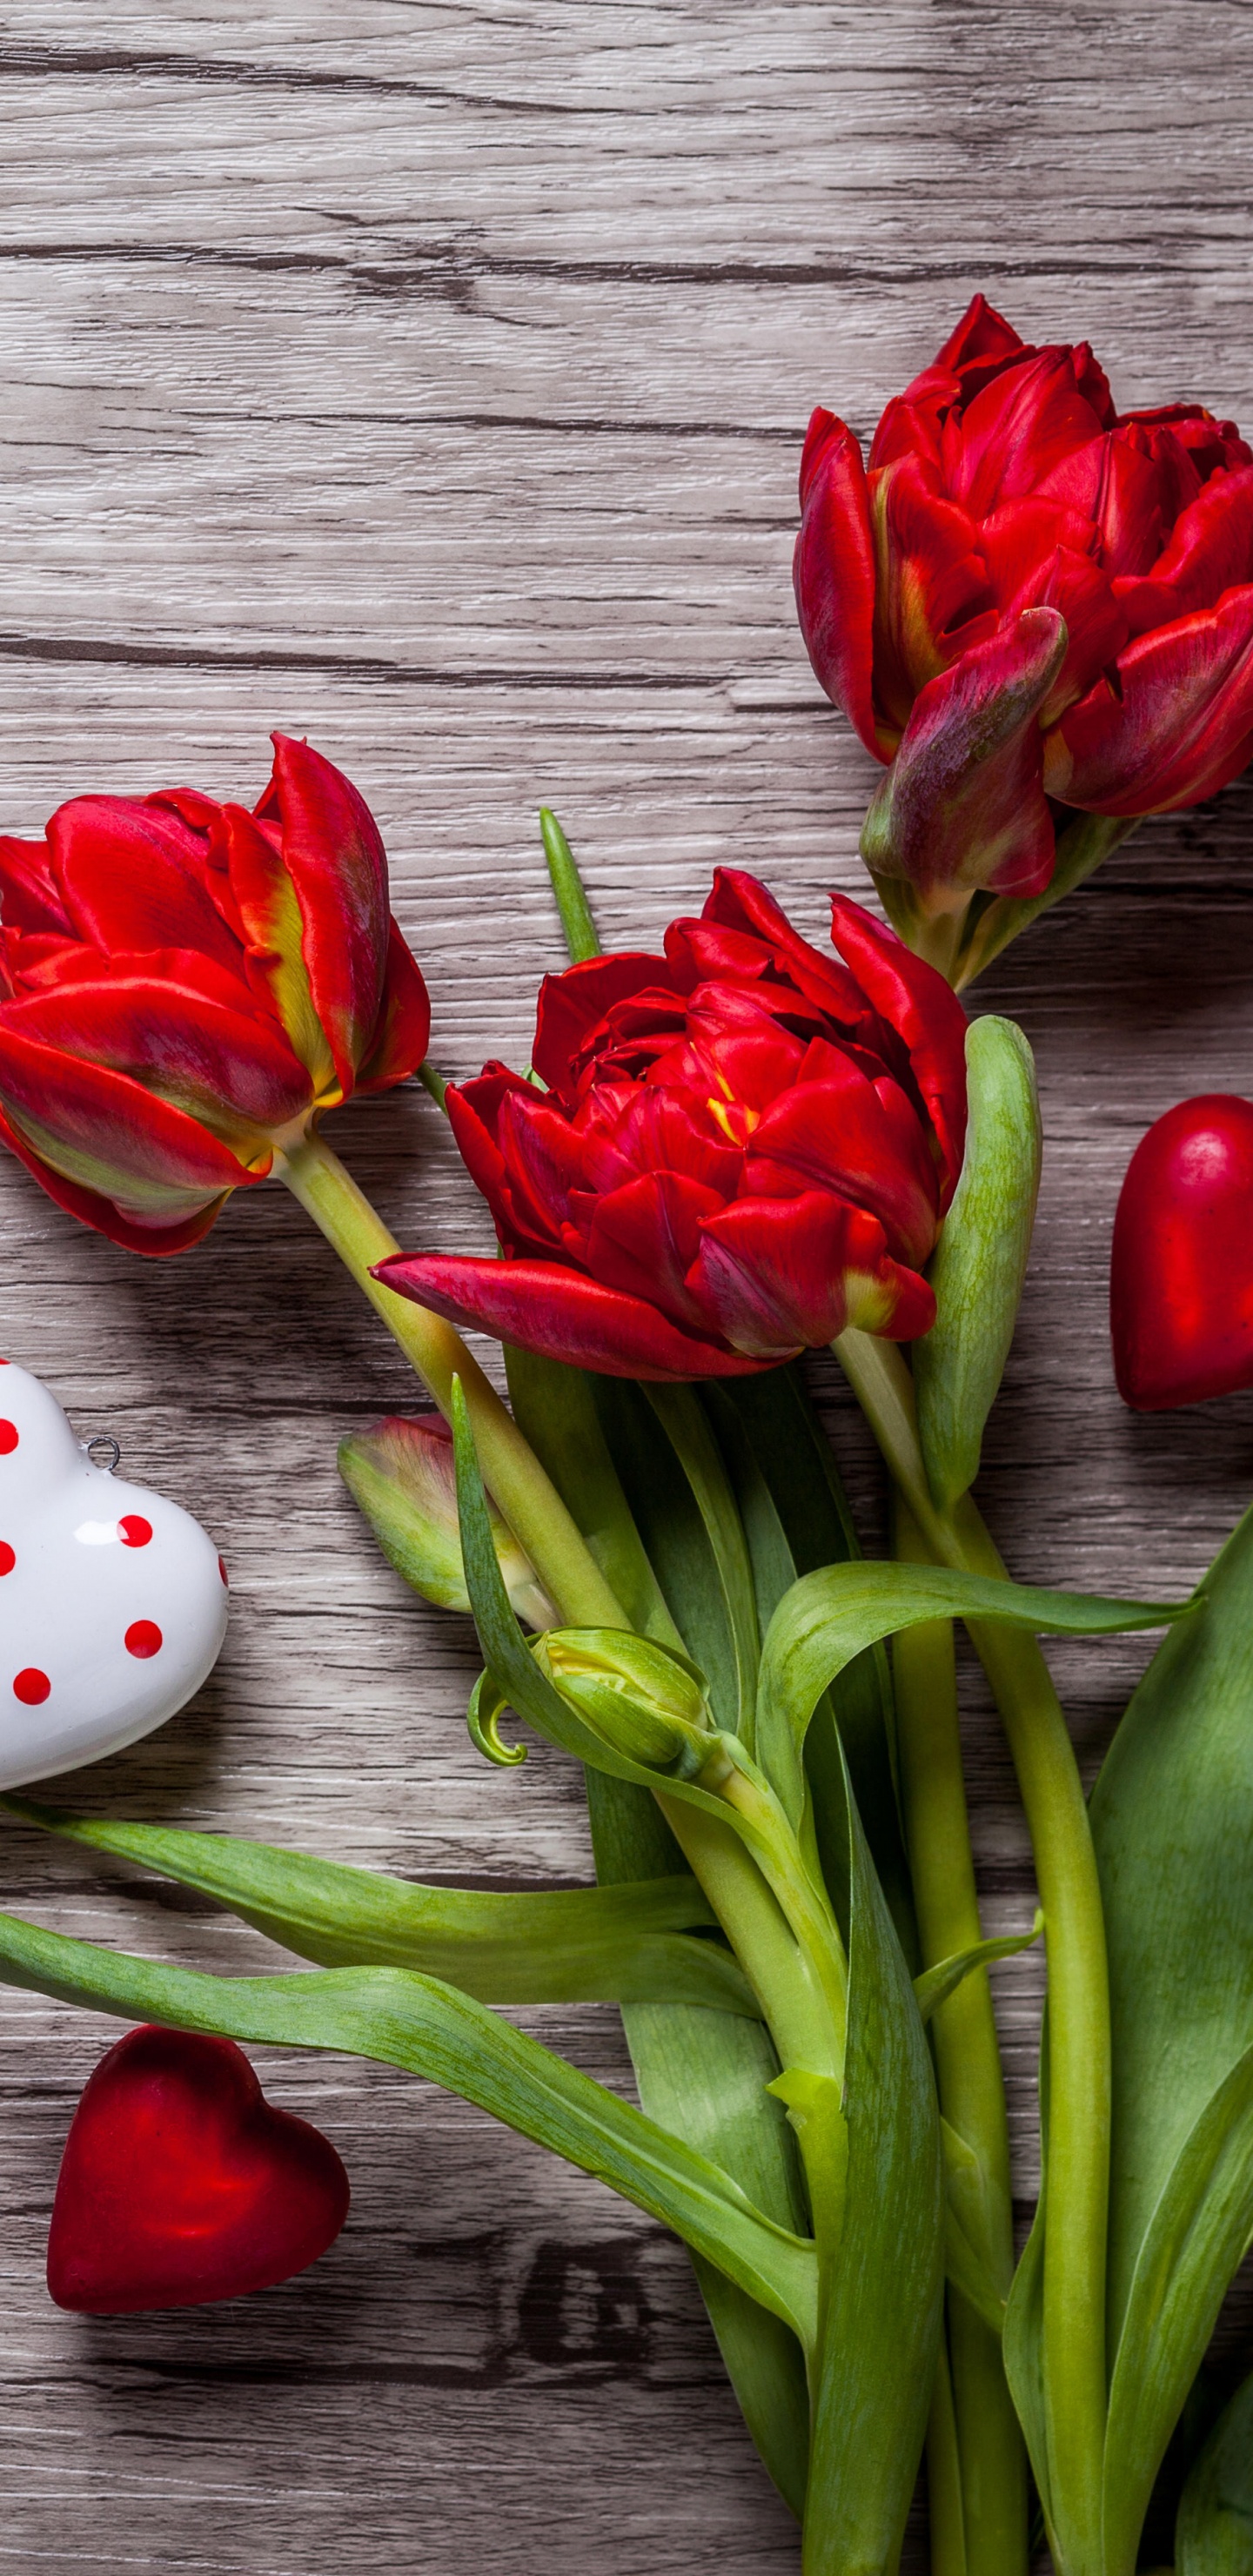 Red Tulips on Gray Wooden Surface. Wallpaper in 1440x2960 Resolution